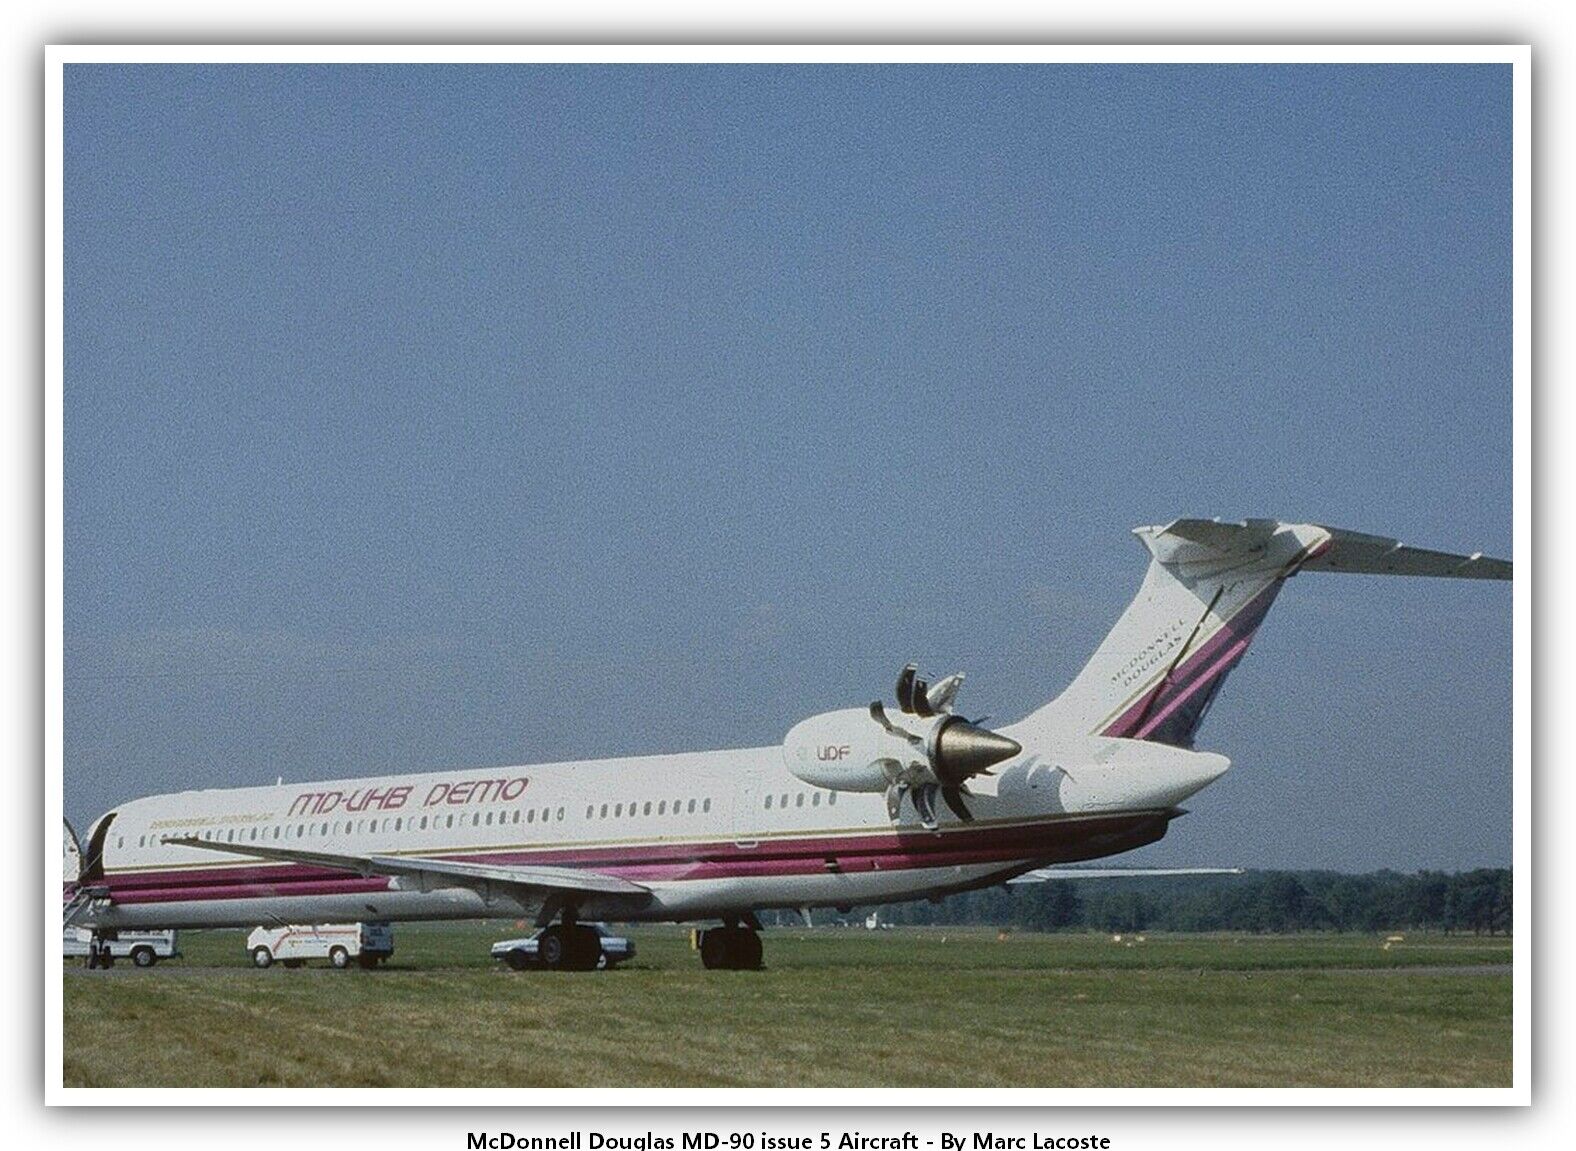 McDonnell Douglas MD-90 issue 5 Aircraft